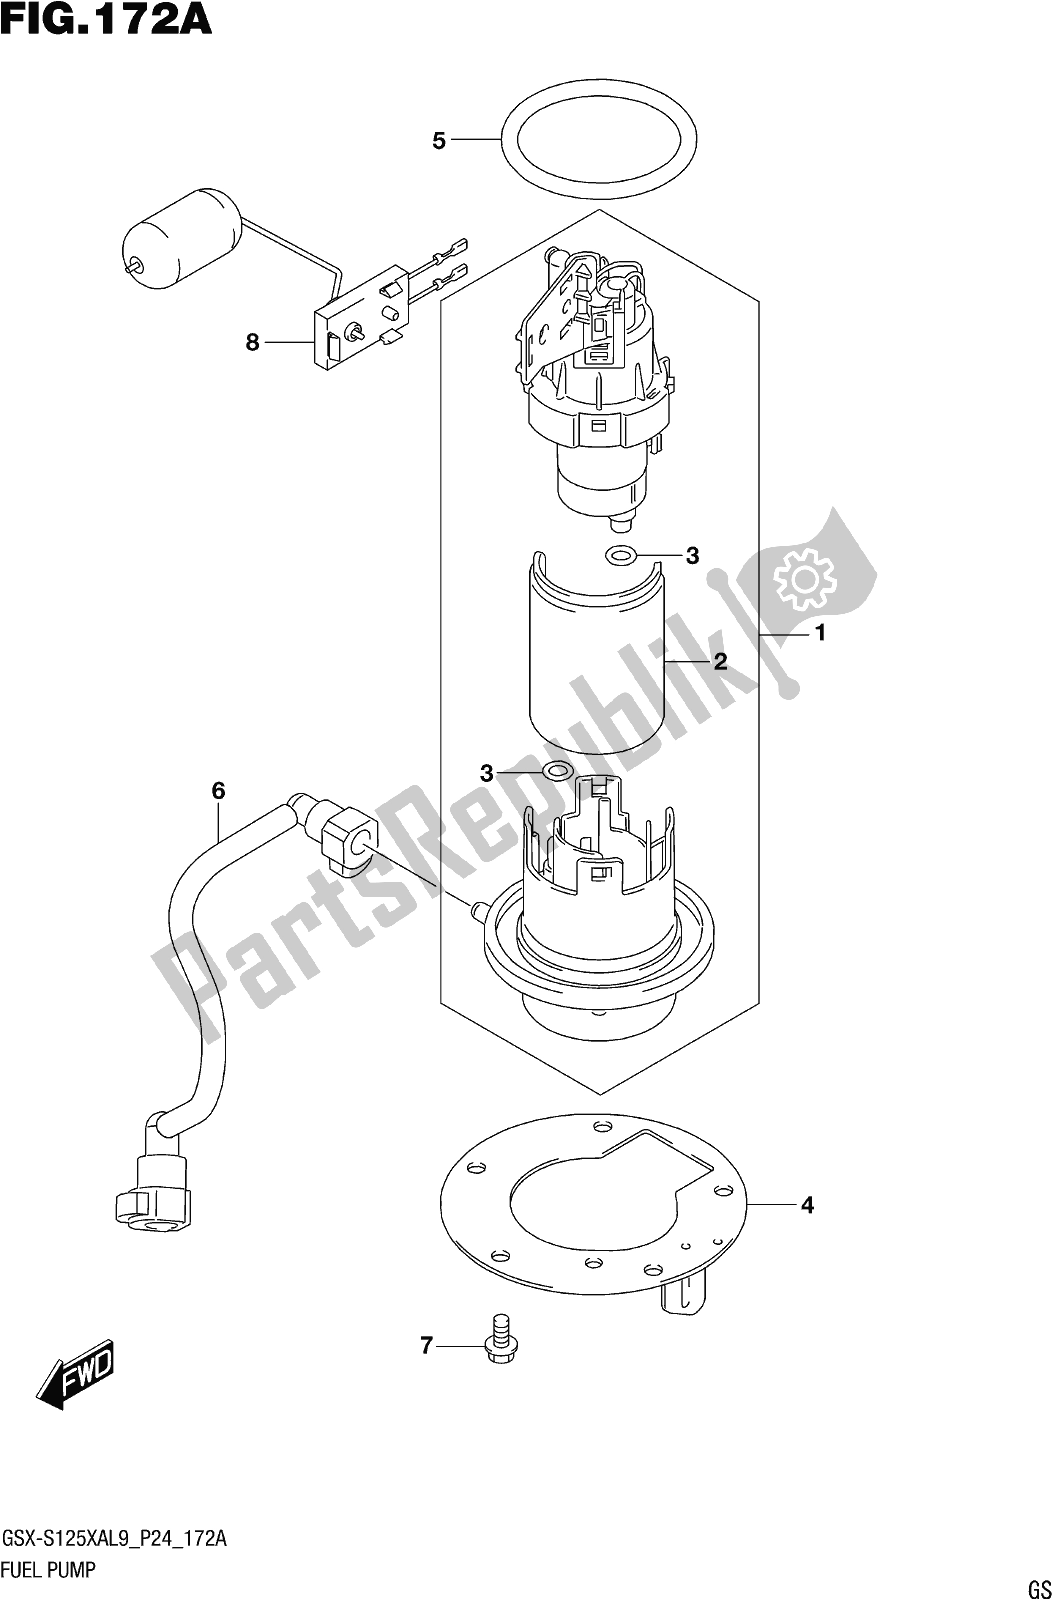 All parts for the Fig. 172a Fuel Pump of the Suzuki Gsx-s 125 XA 2019